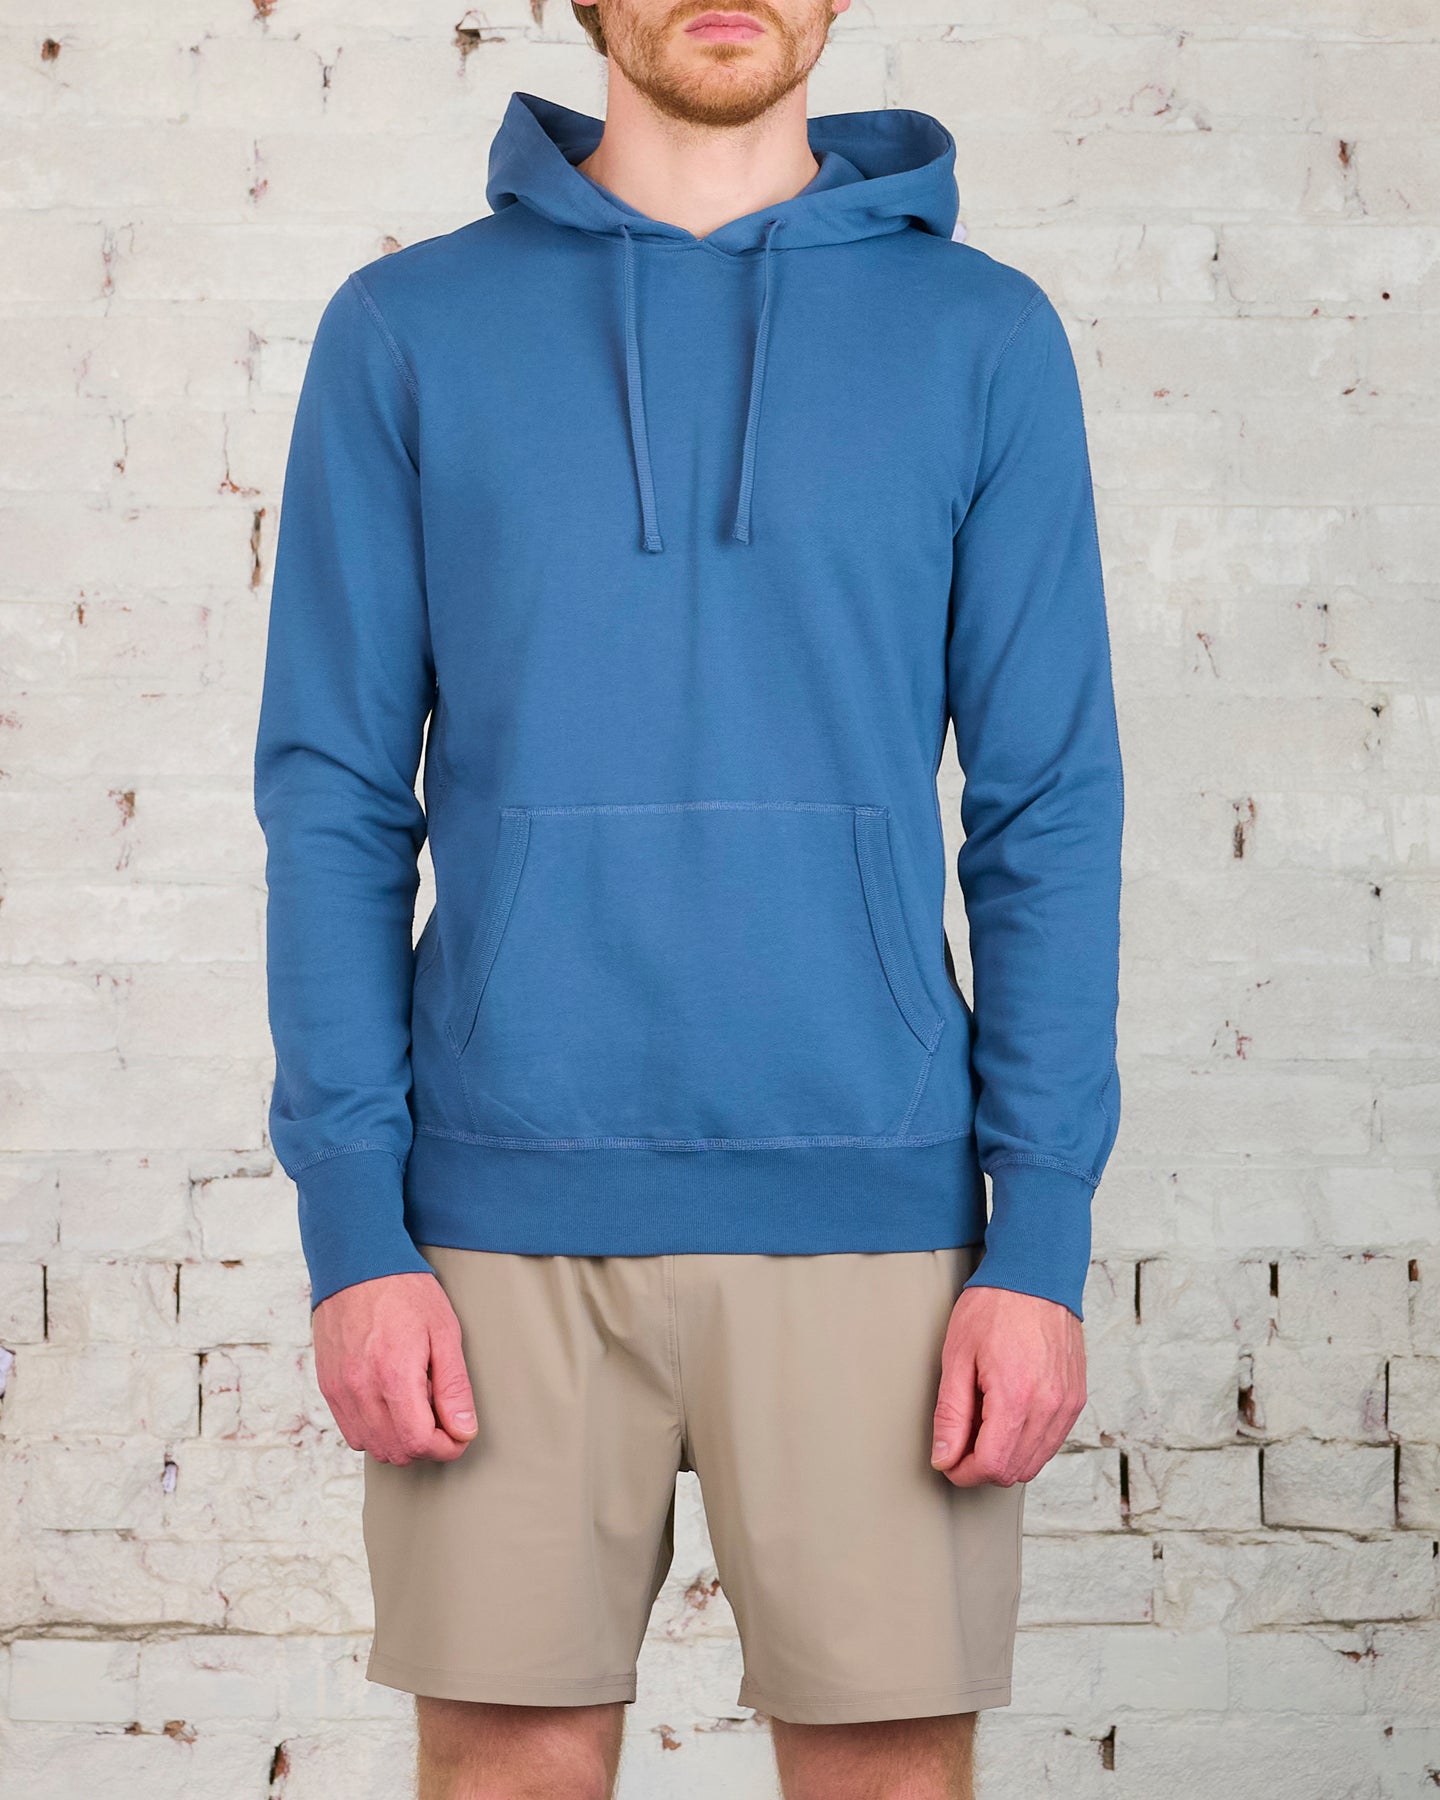 Reigning Champ Lightweight Terry Hooded Sweatshirt Washed Blue – LESS 17